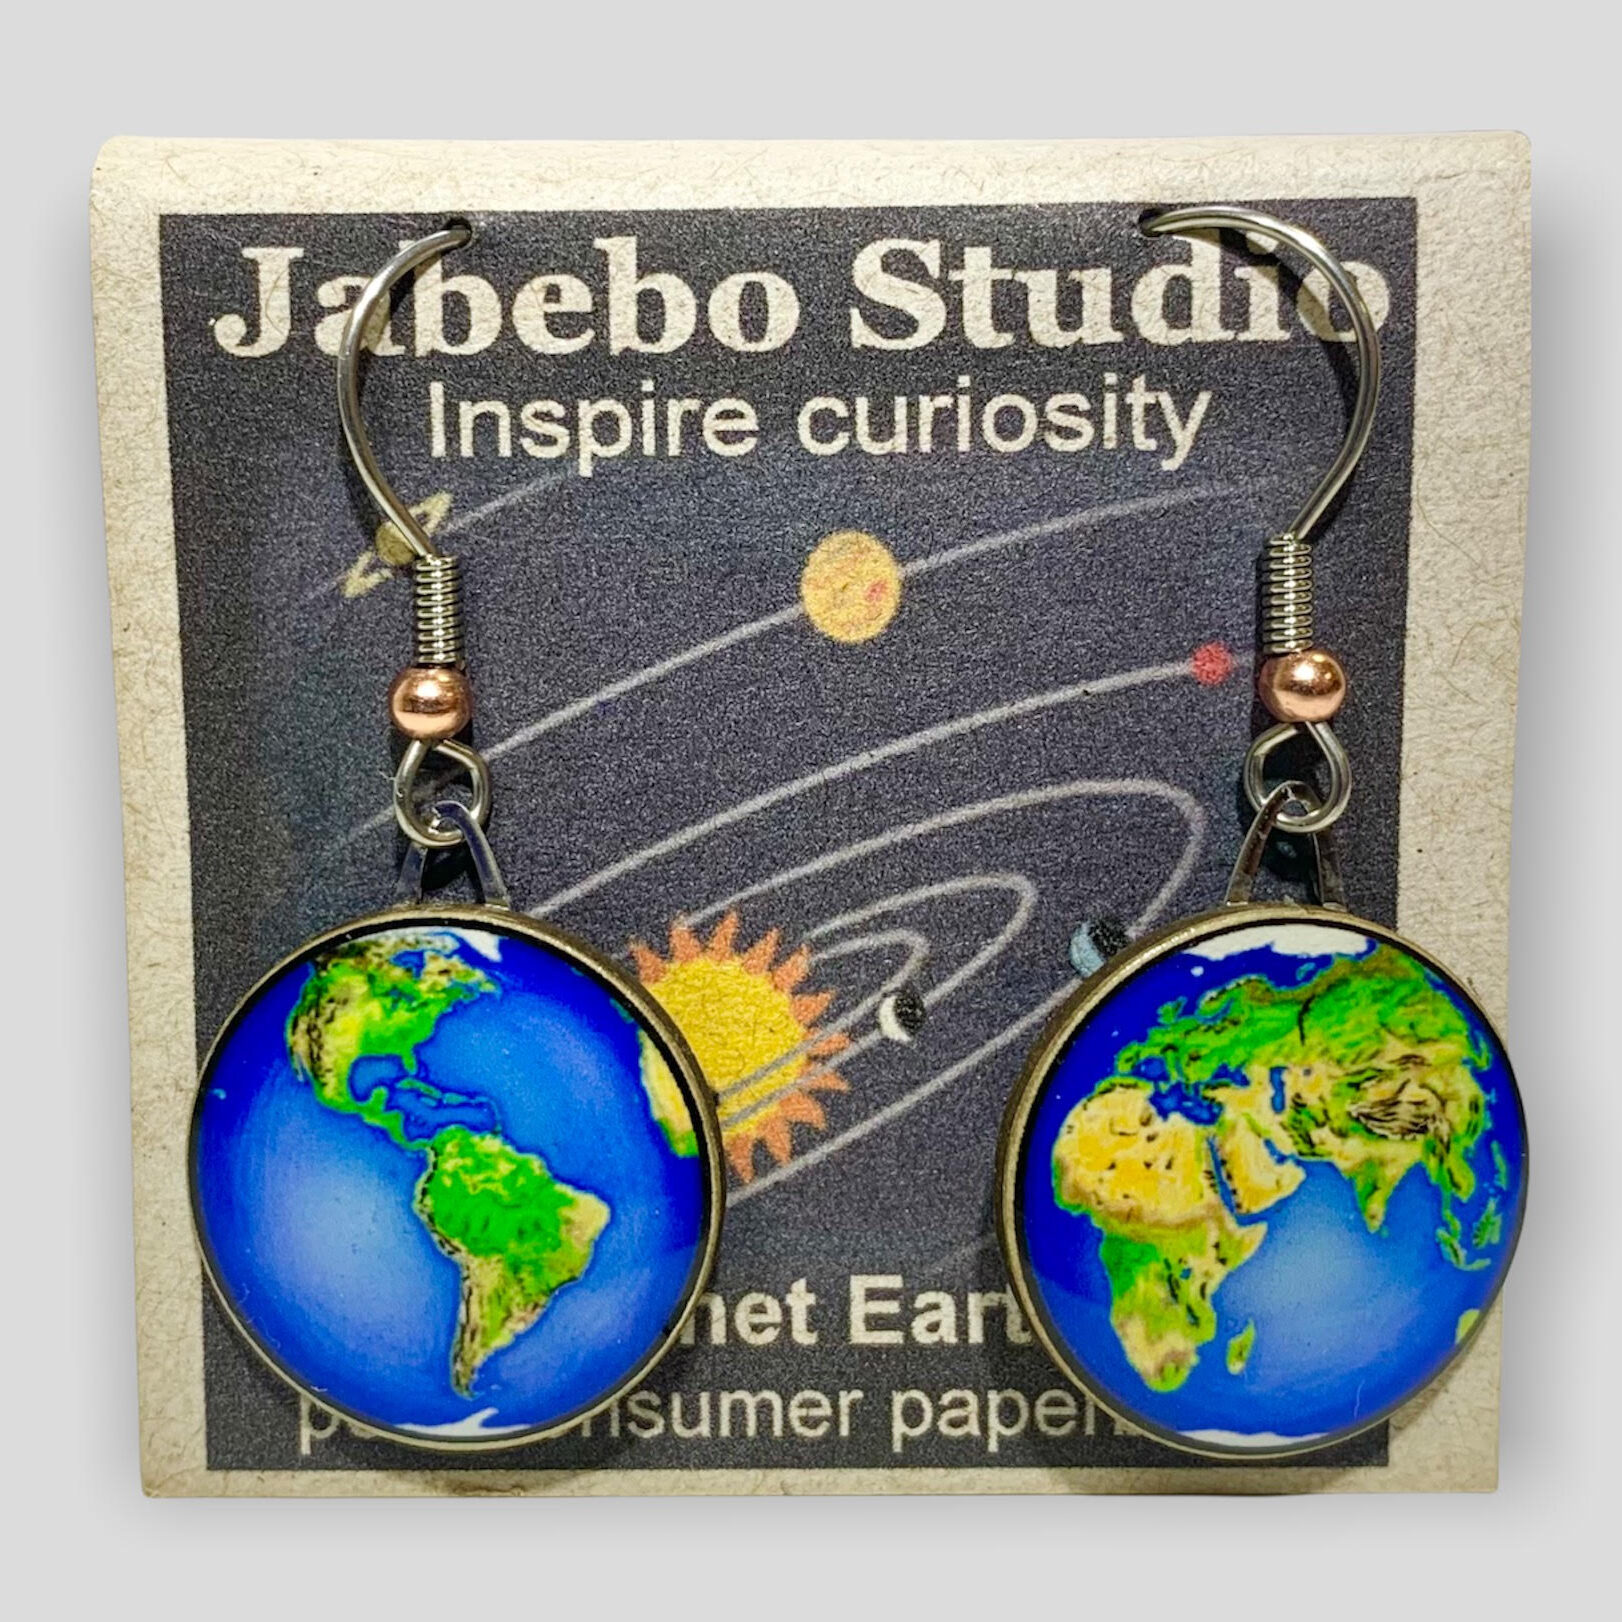 Picture shown is of 1 inch tall pair of earrings of Planet Earth.